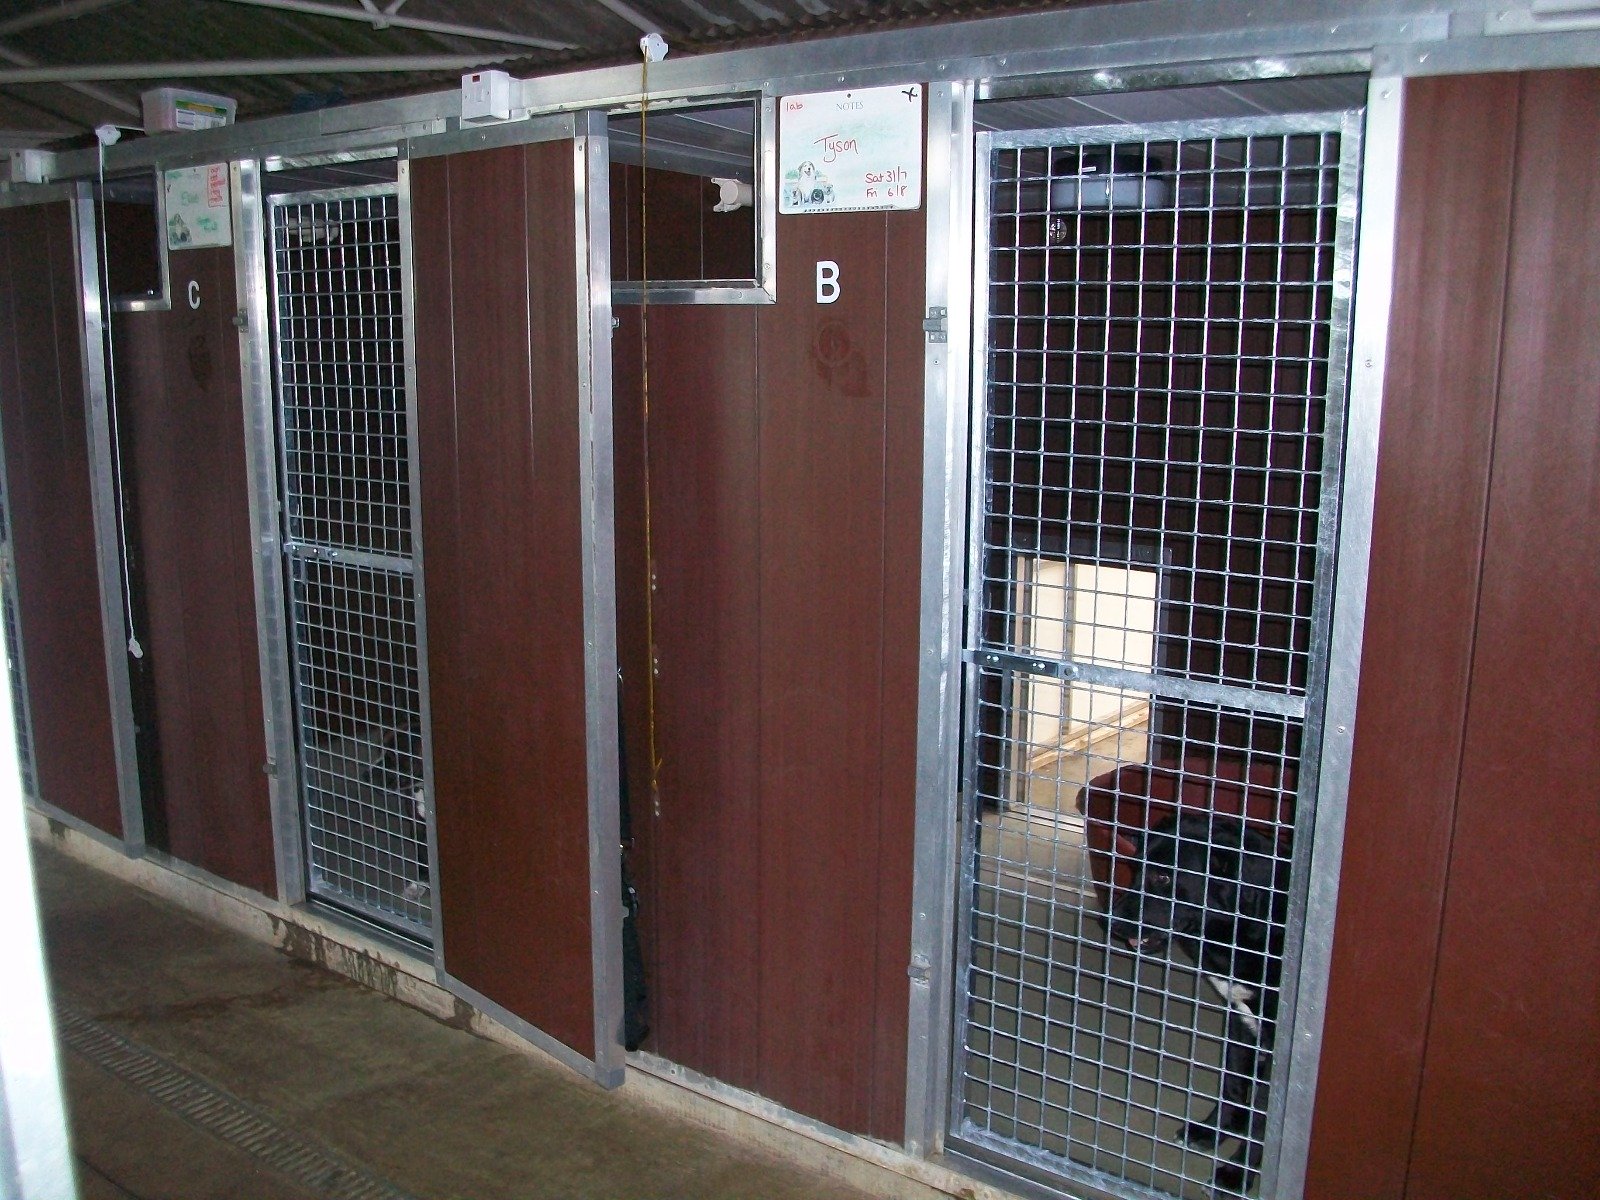 Bespoke Dog Run Panels Made To Measure Call Sales Now 01270 212 193 For a Free No Obligation Quote